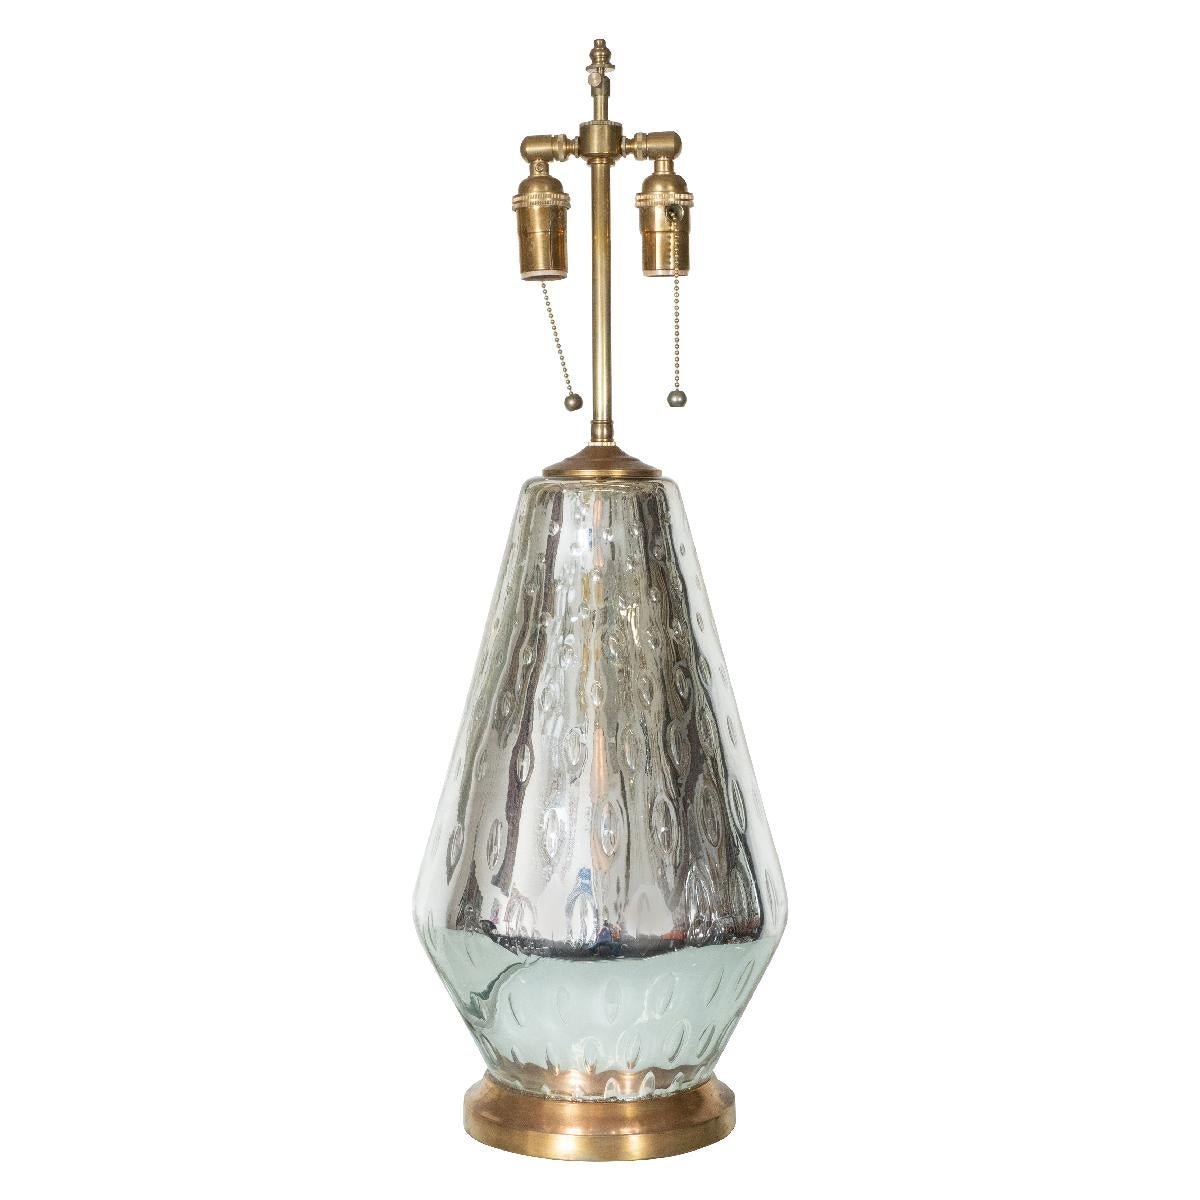 Single conical mercury glass table lamp with bubble design and brass hardware.